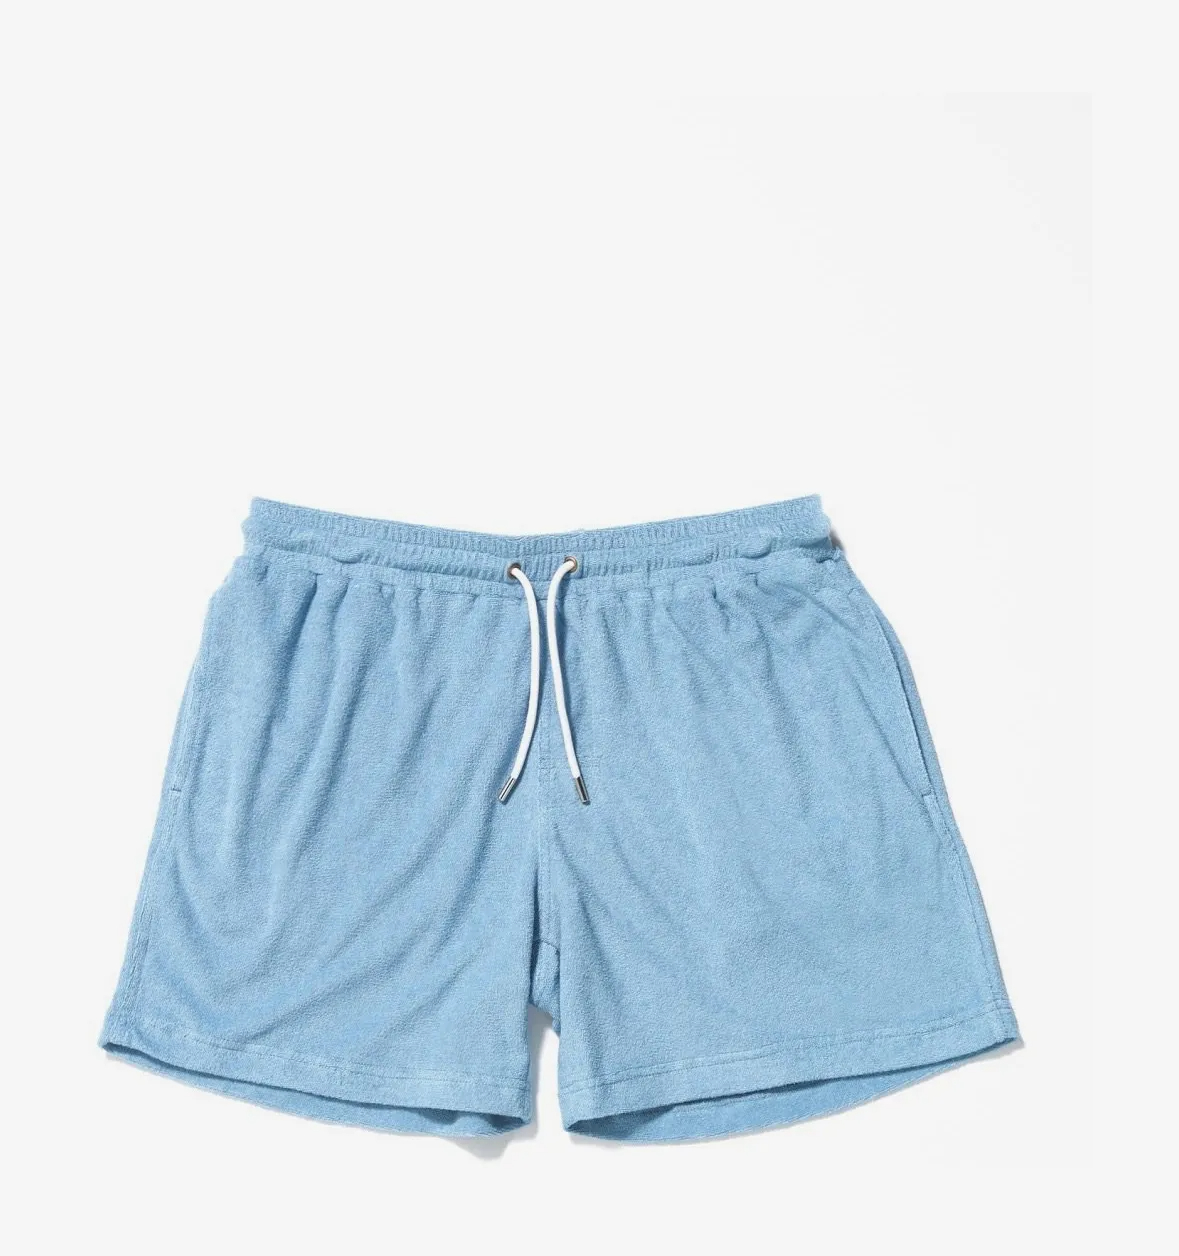 Mesh shorts men's, when it comes to styling mesh shorts for men, there are various ways to create trendy and comfortable